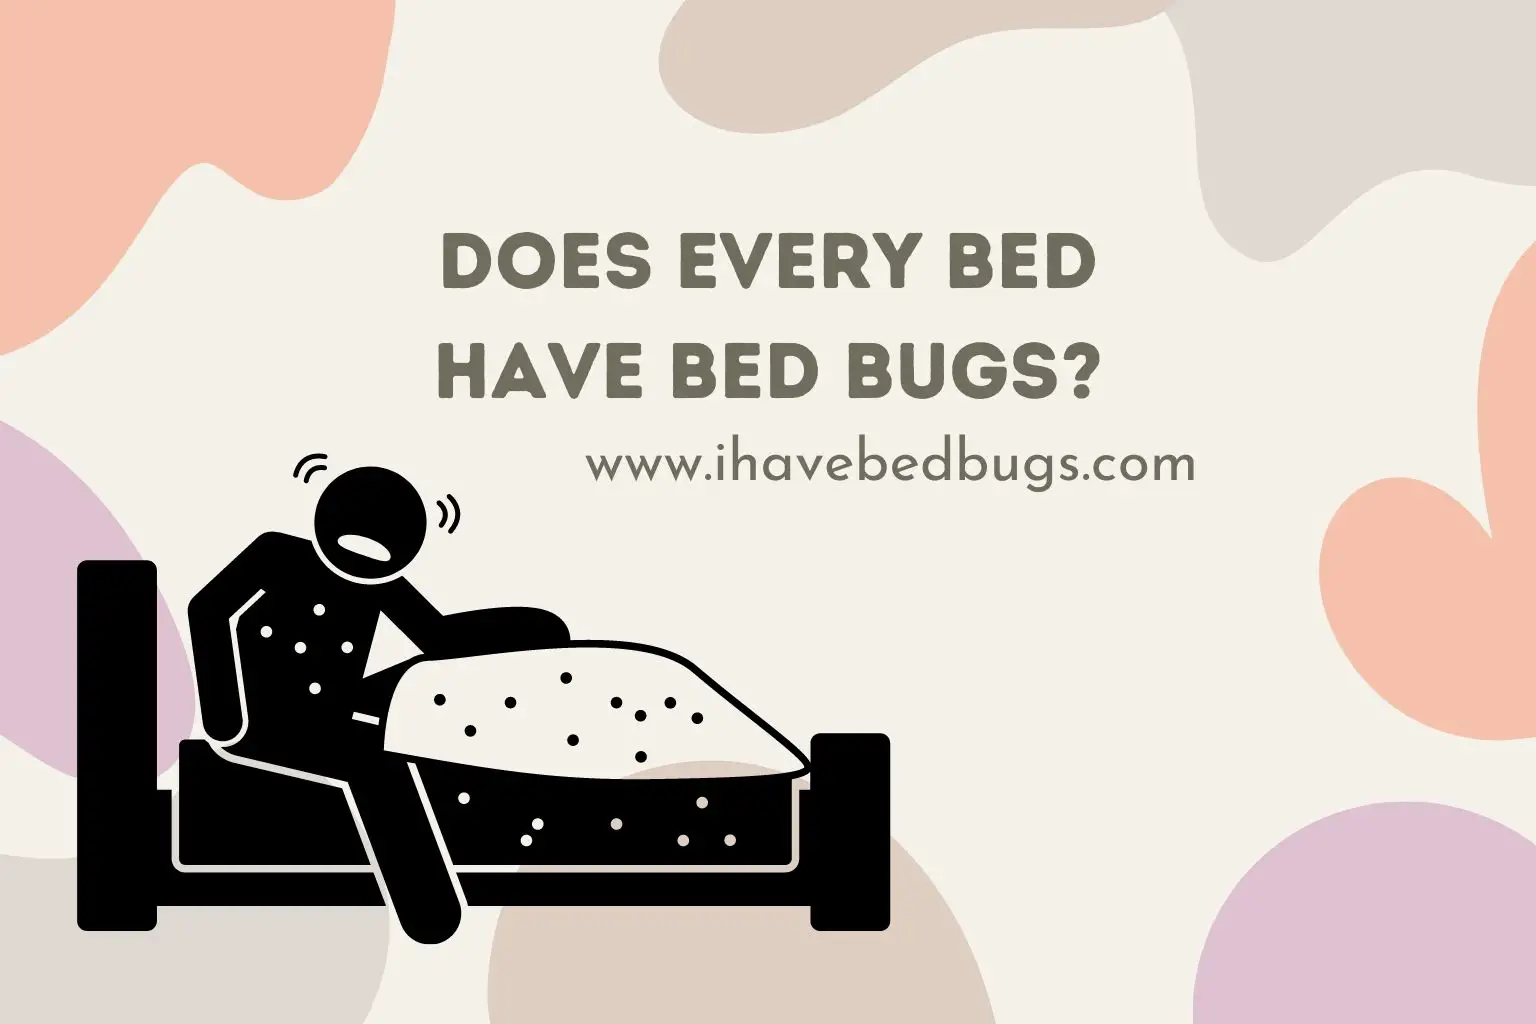 Does every bed have bed bugs